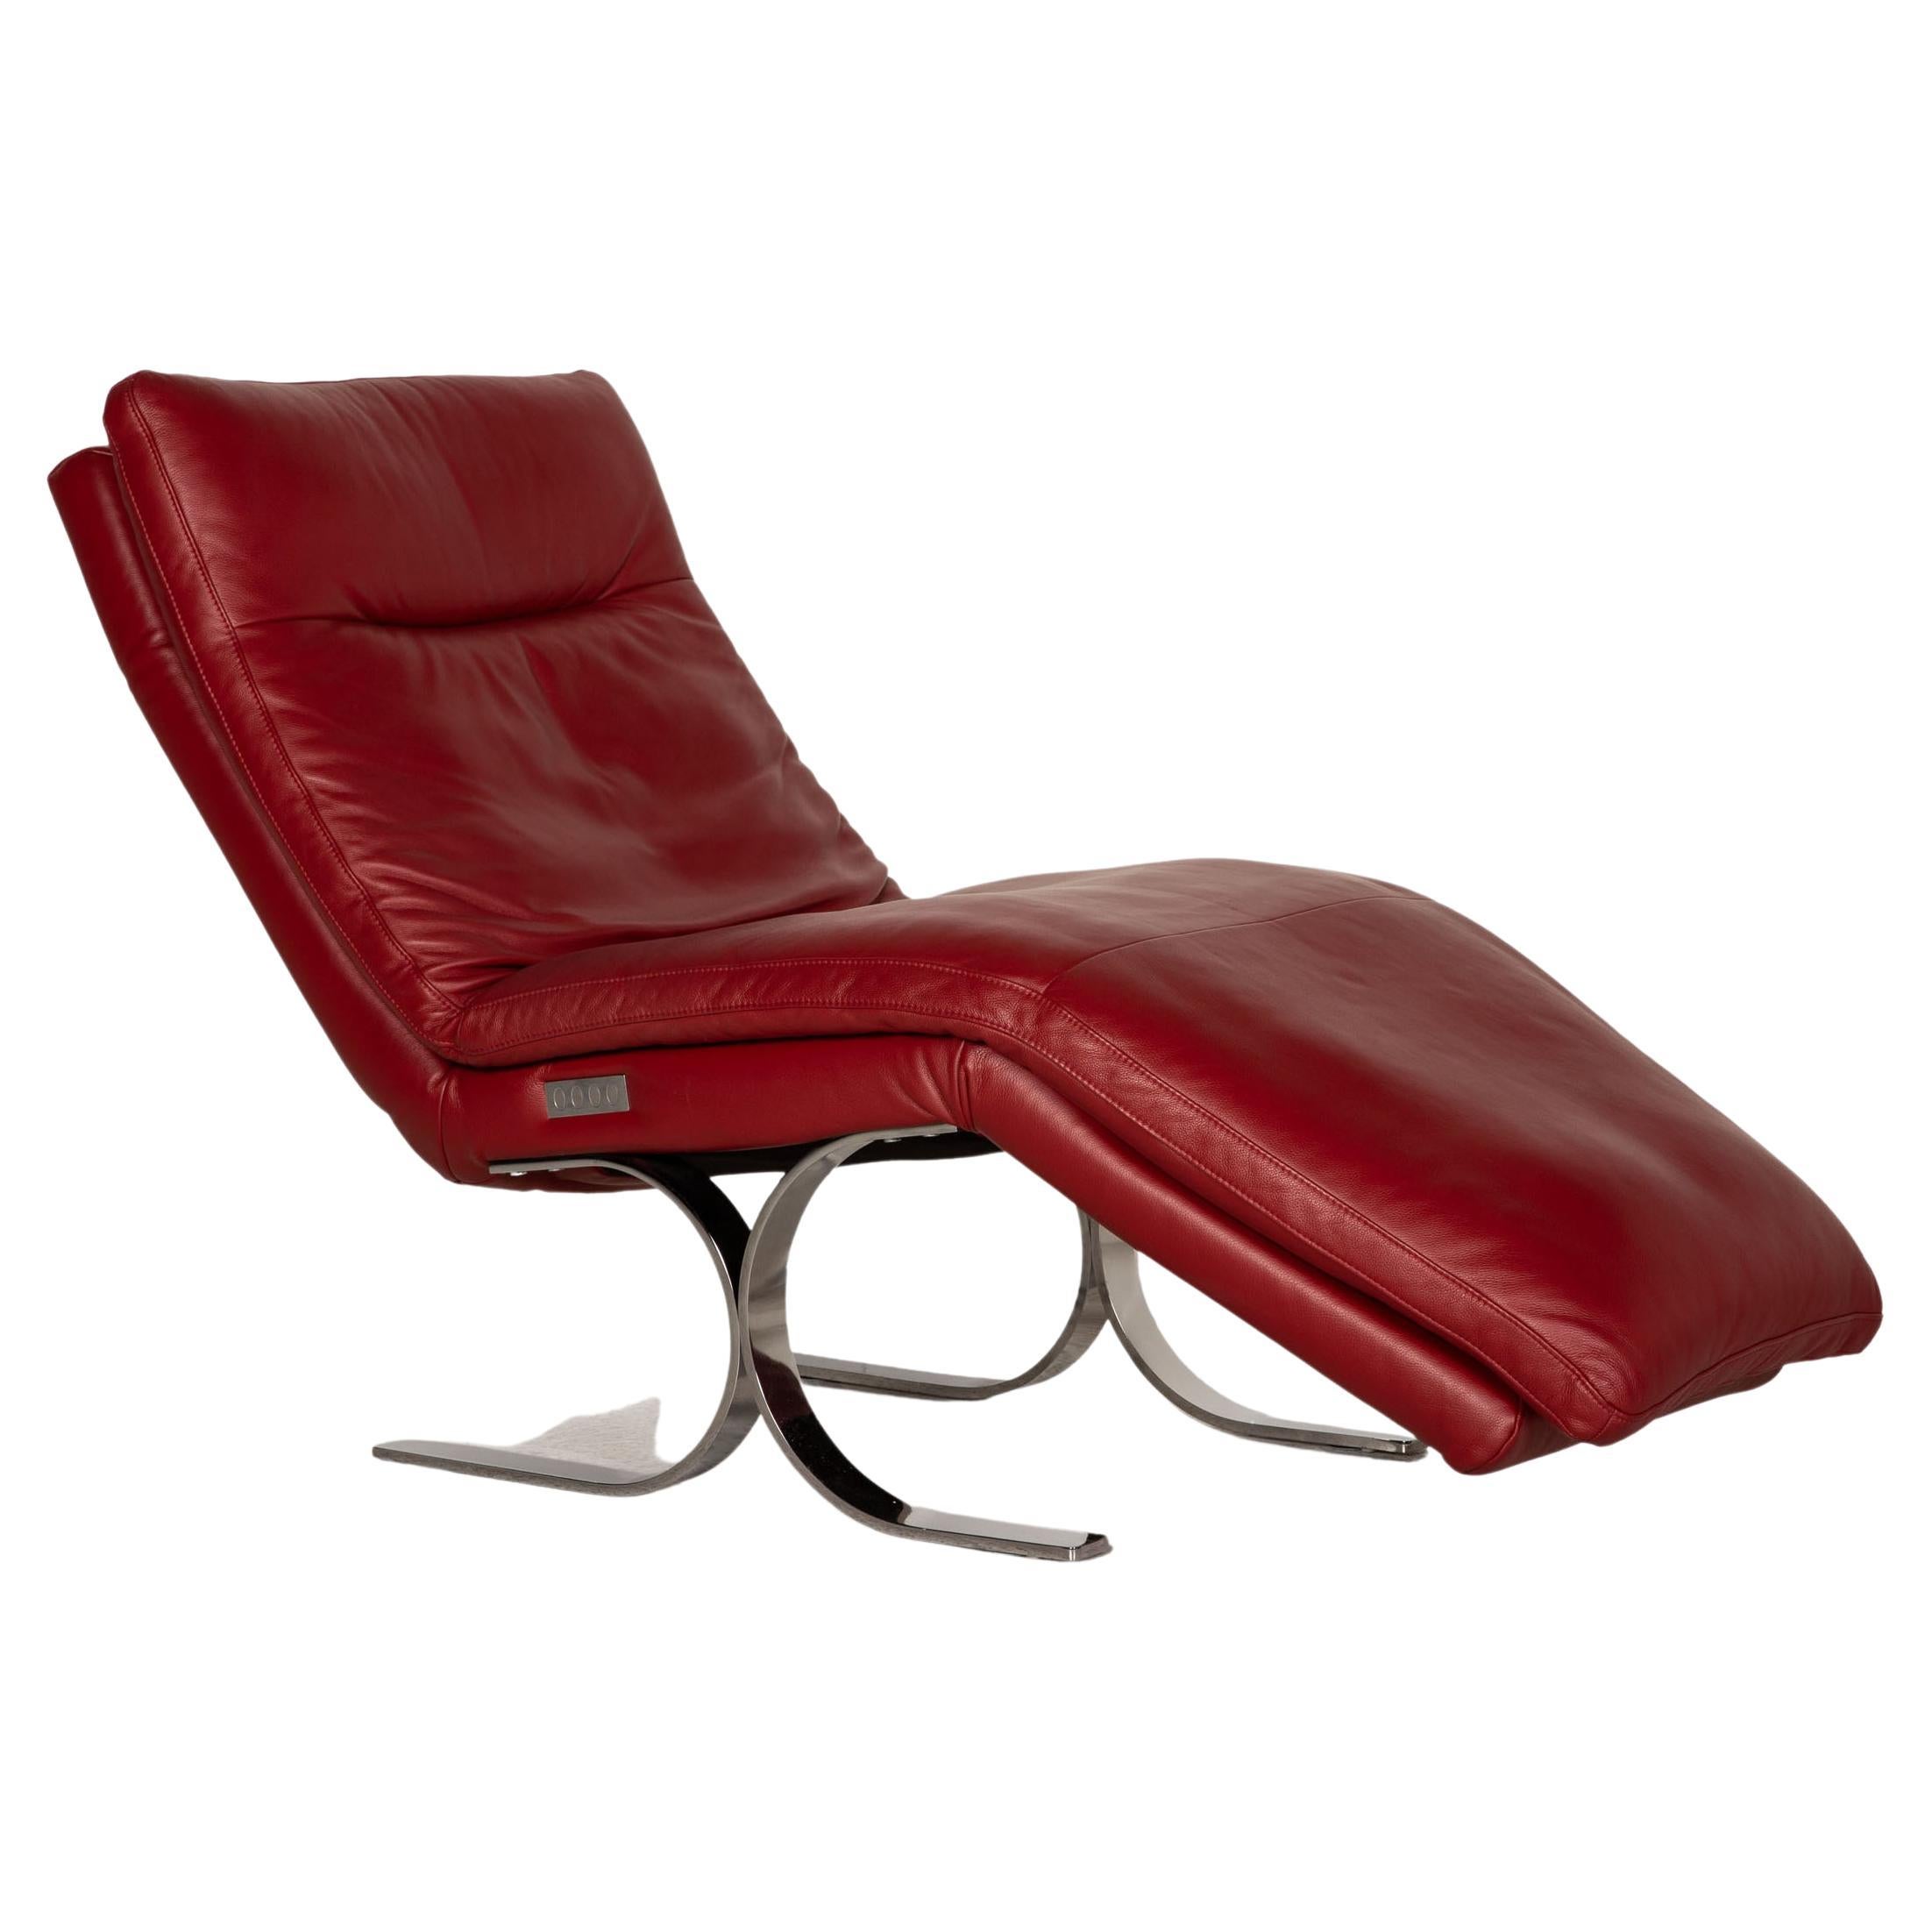 Willi Schillig Daily Dreams Leather Lounger Red Function Relaxation Function For Sale